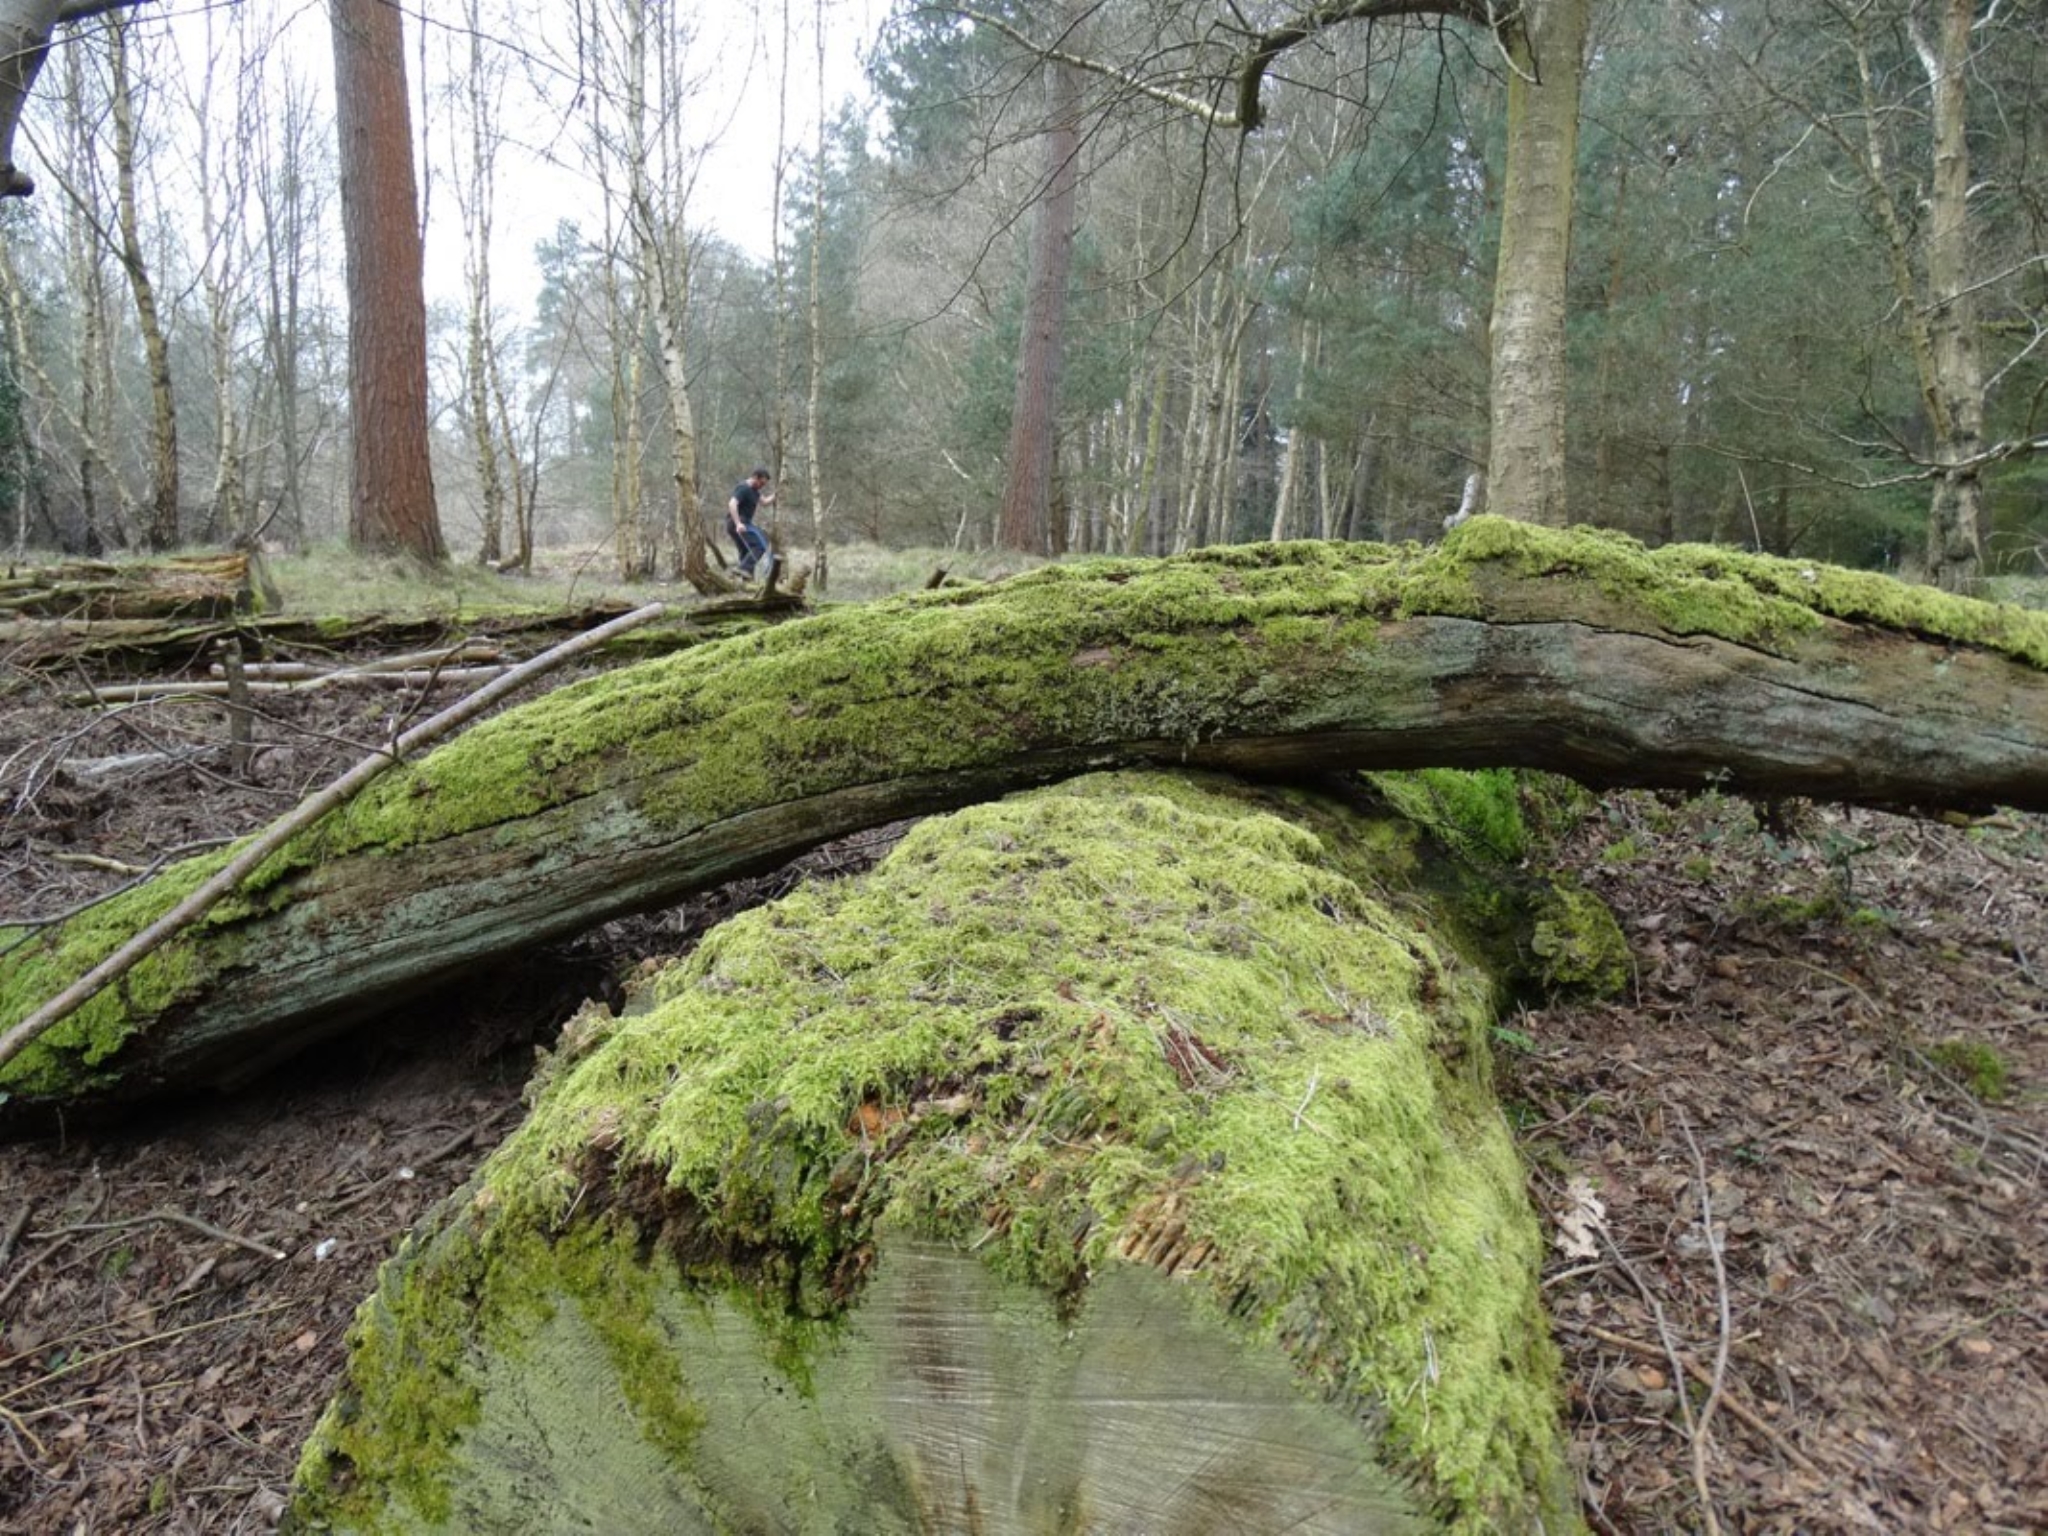 A photo from the FoTF Conservation Event - April 2018 - Improving habitat at High Lodge : A moss covered falled tree